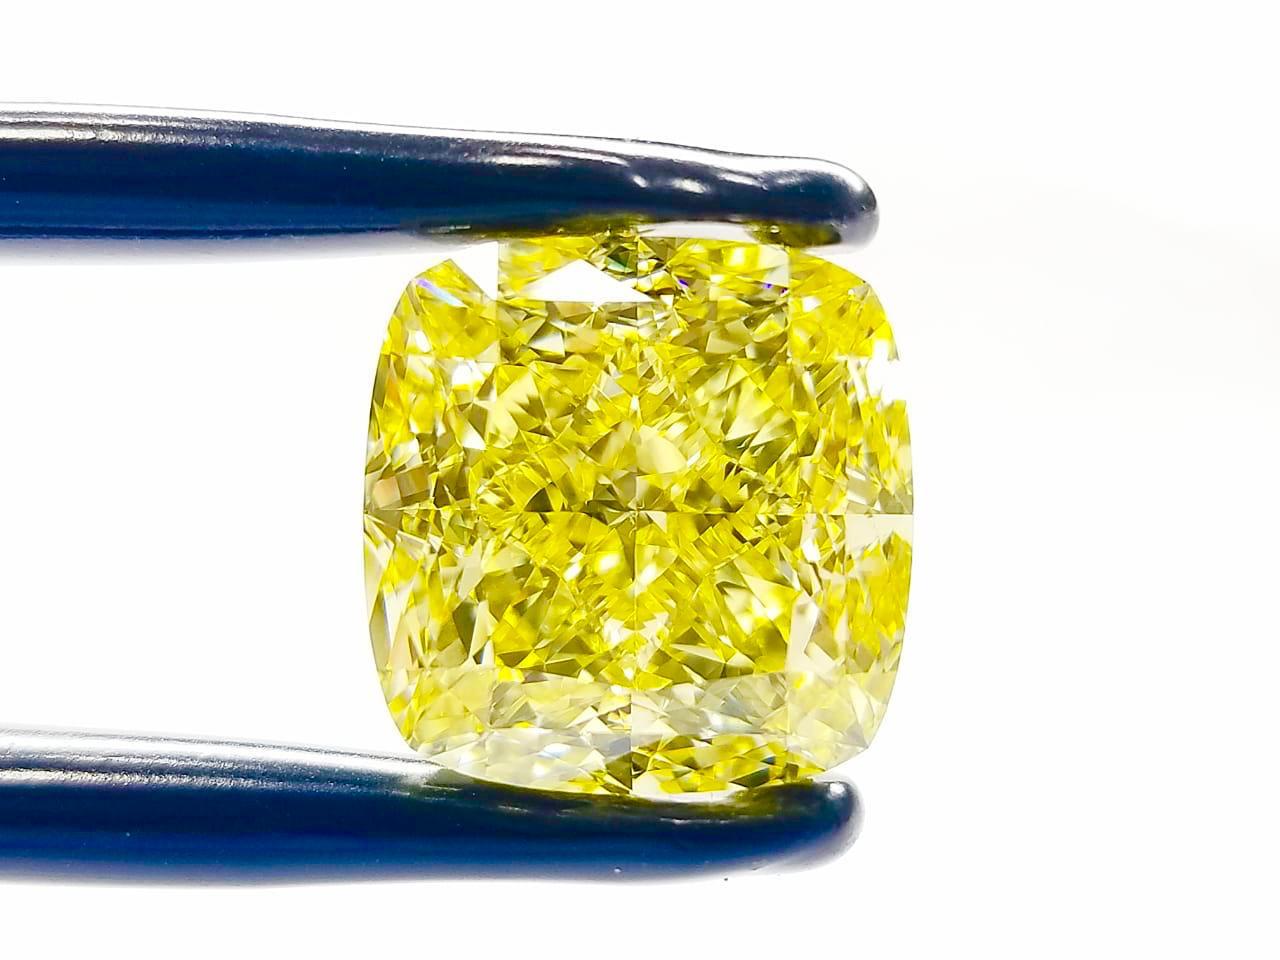 From the Emilio Jewelry Museum Vault, Showcasing a magnificent investment grade 16.00 carat natural fancy intense yellow diamond.
We are experts at creating jewels for these very special collectible pieces, and we would be happy to create your dream